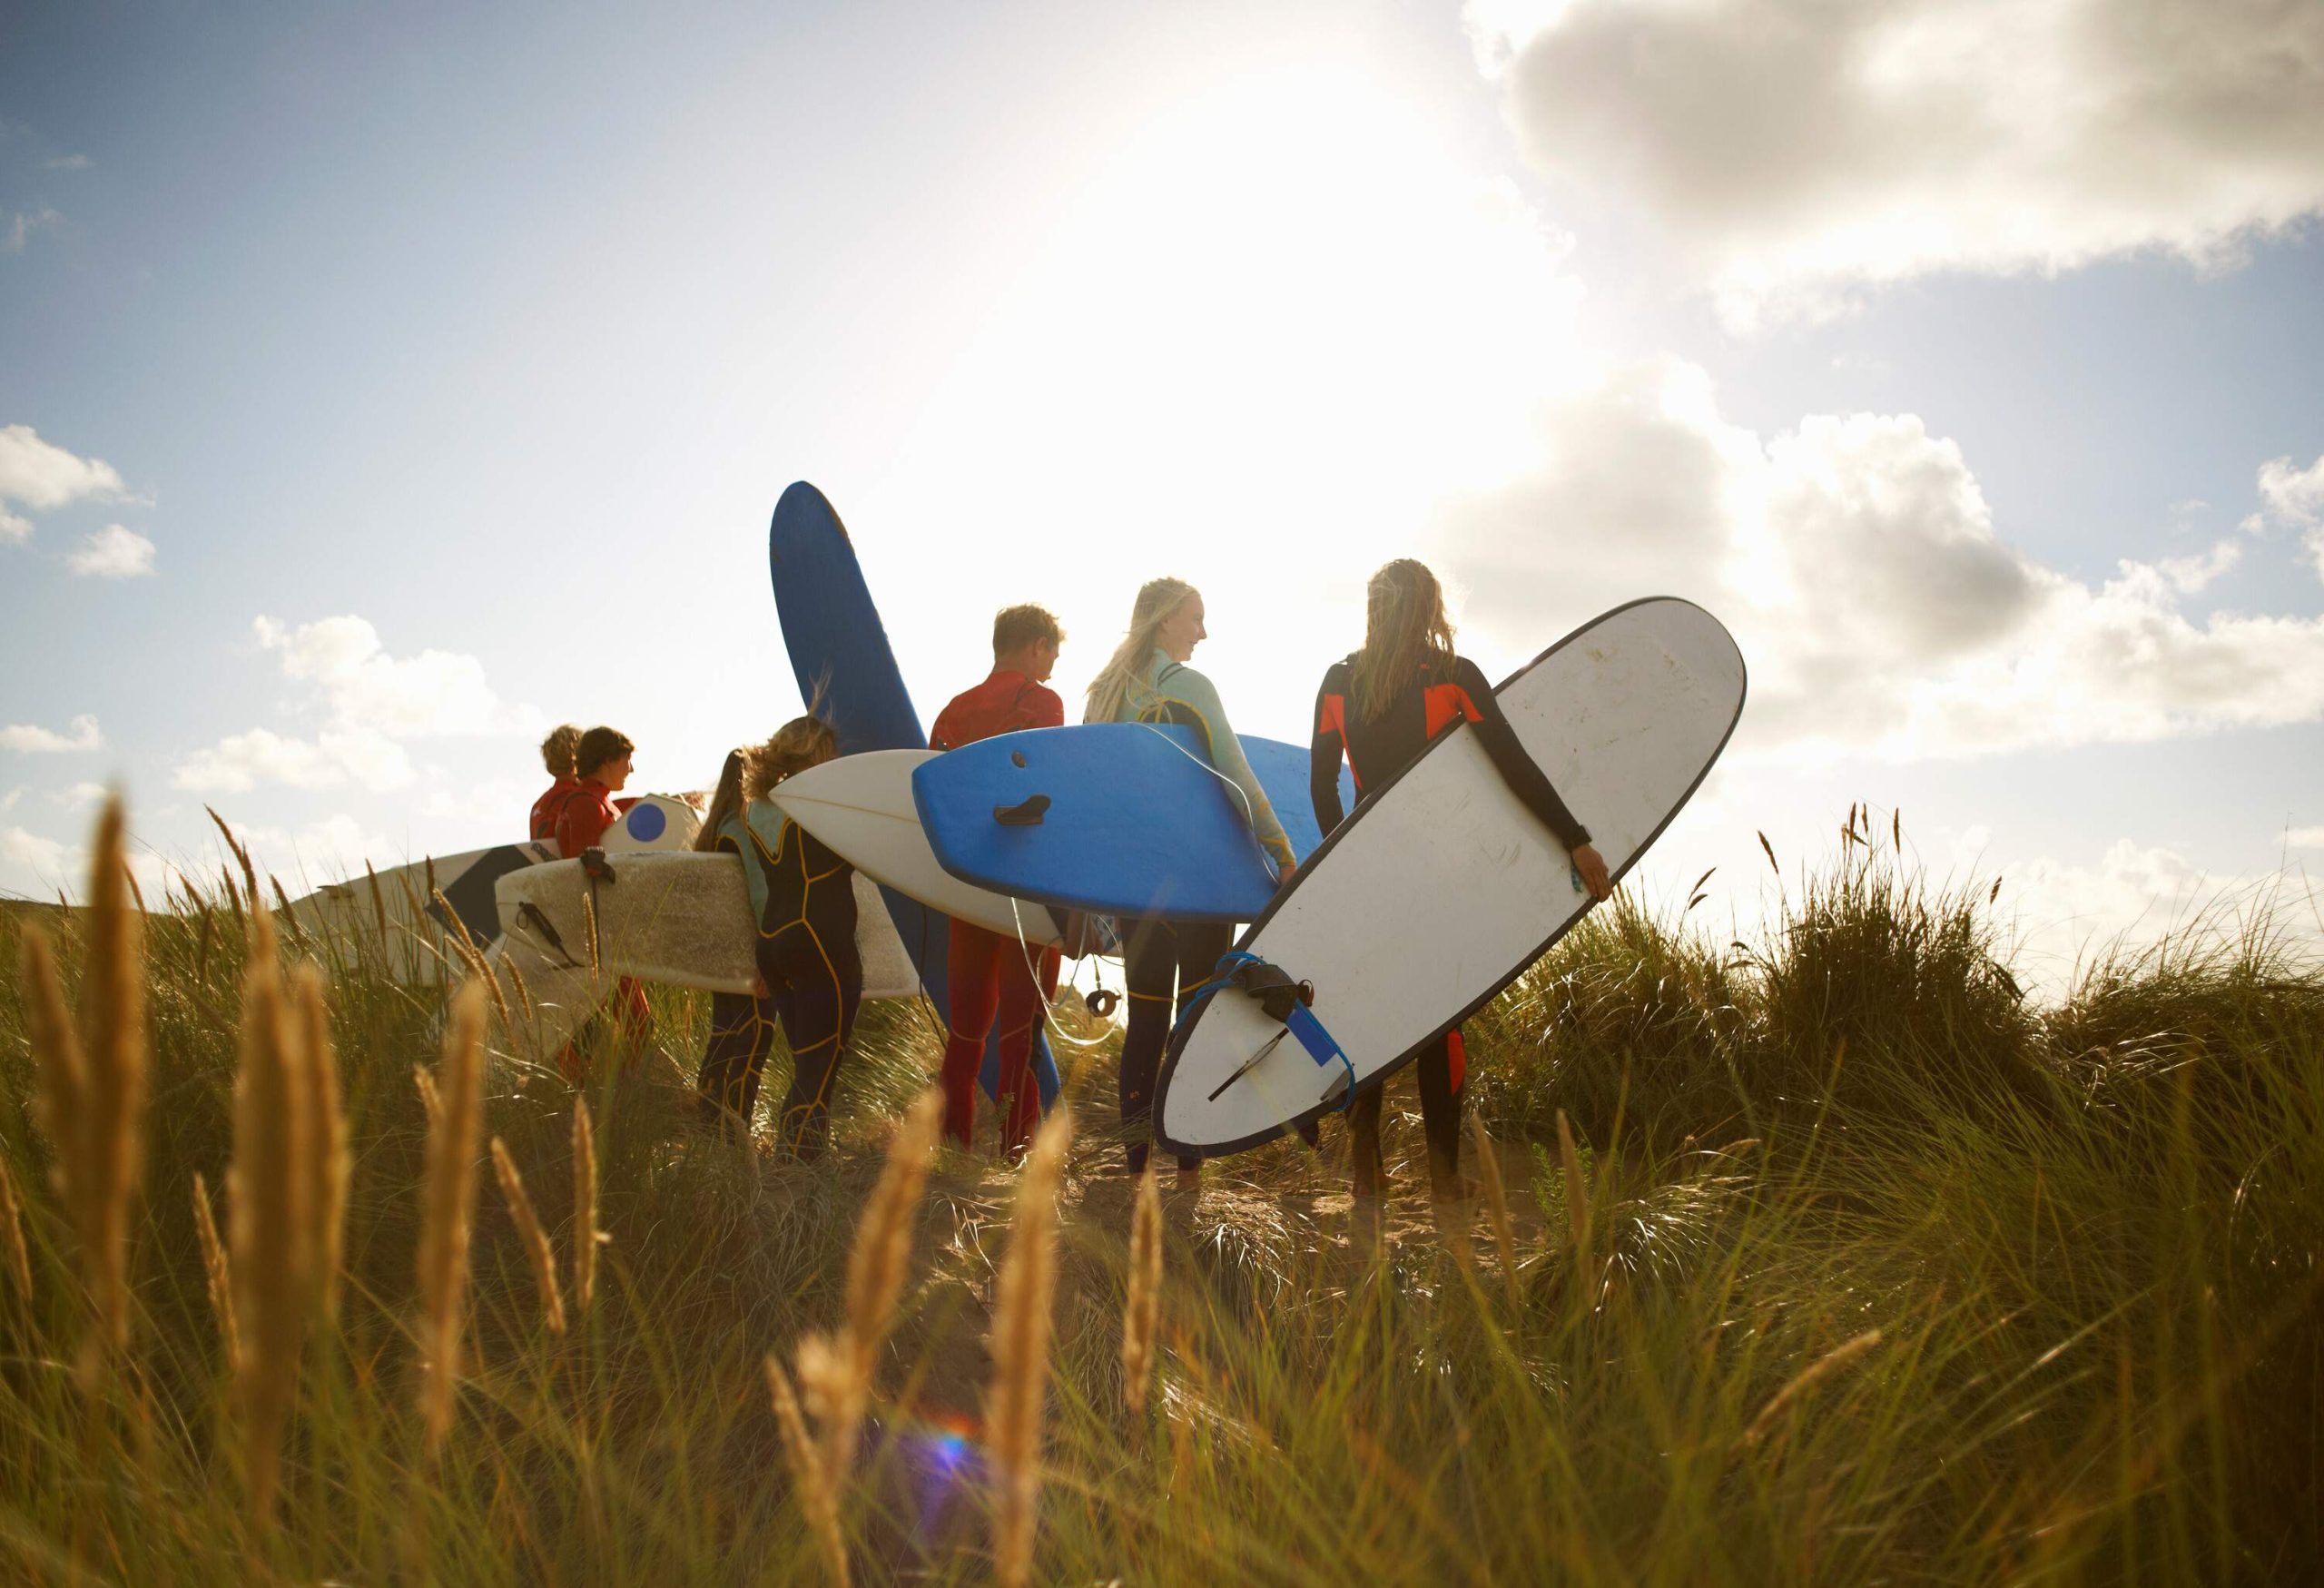 A bunch of surfers are carrying their surfboards while standing in the sun on a patch of grass.